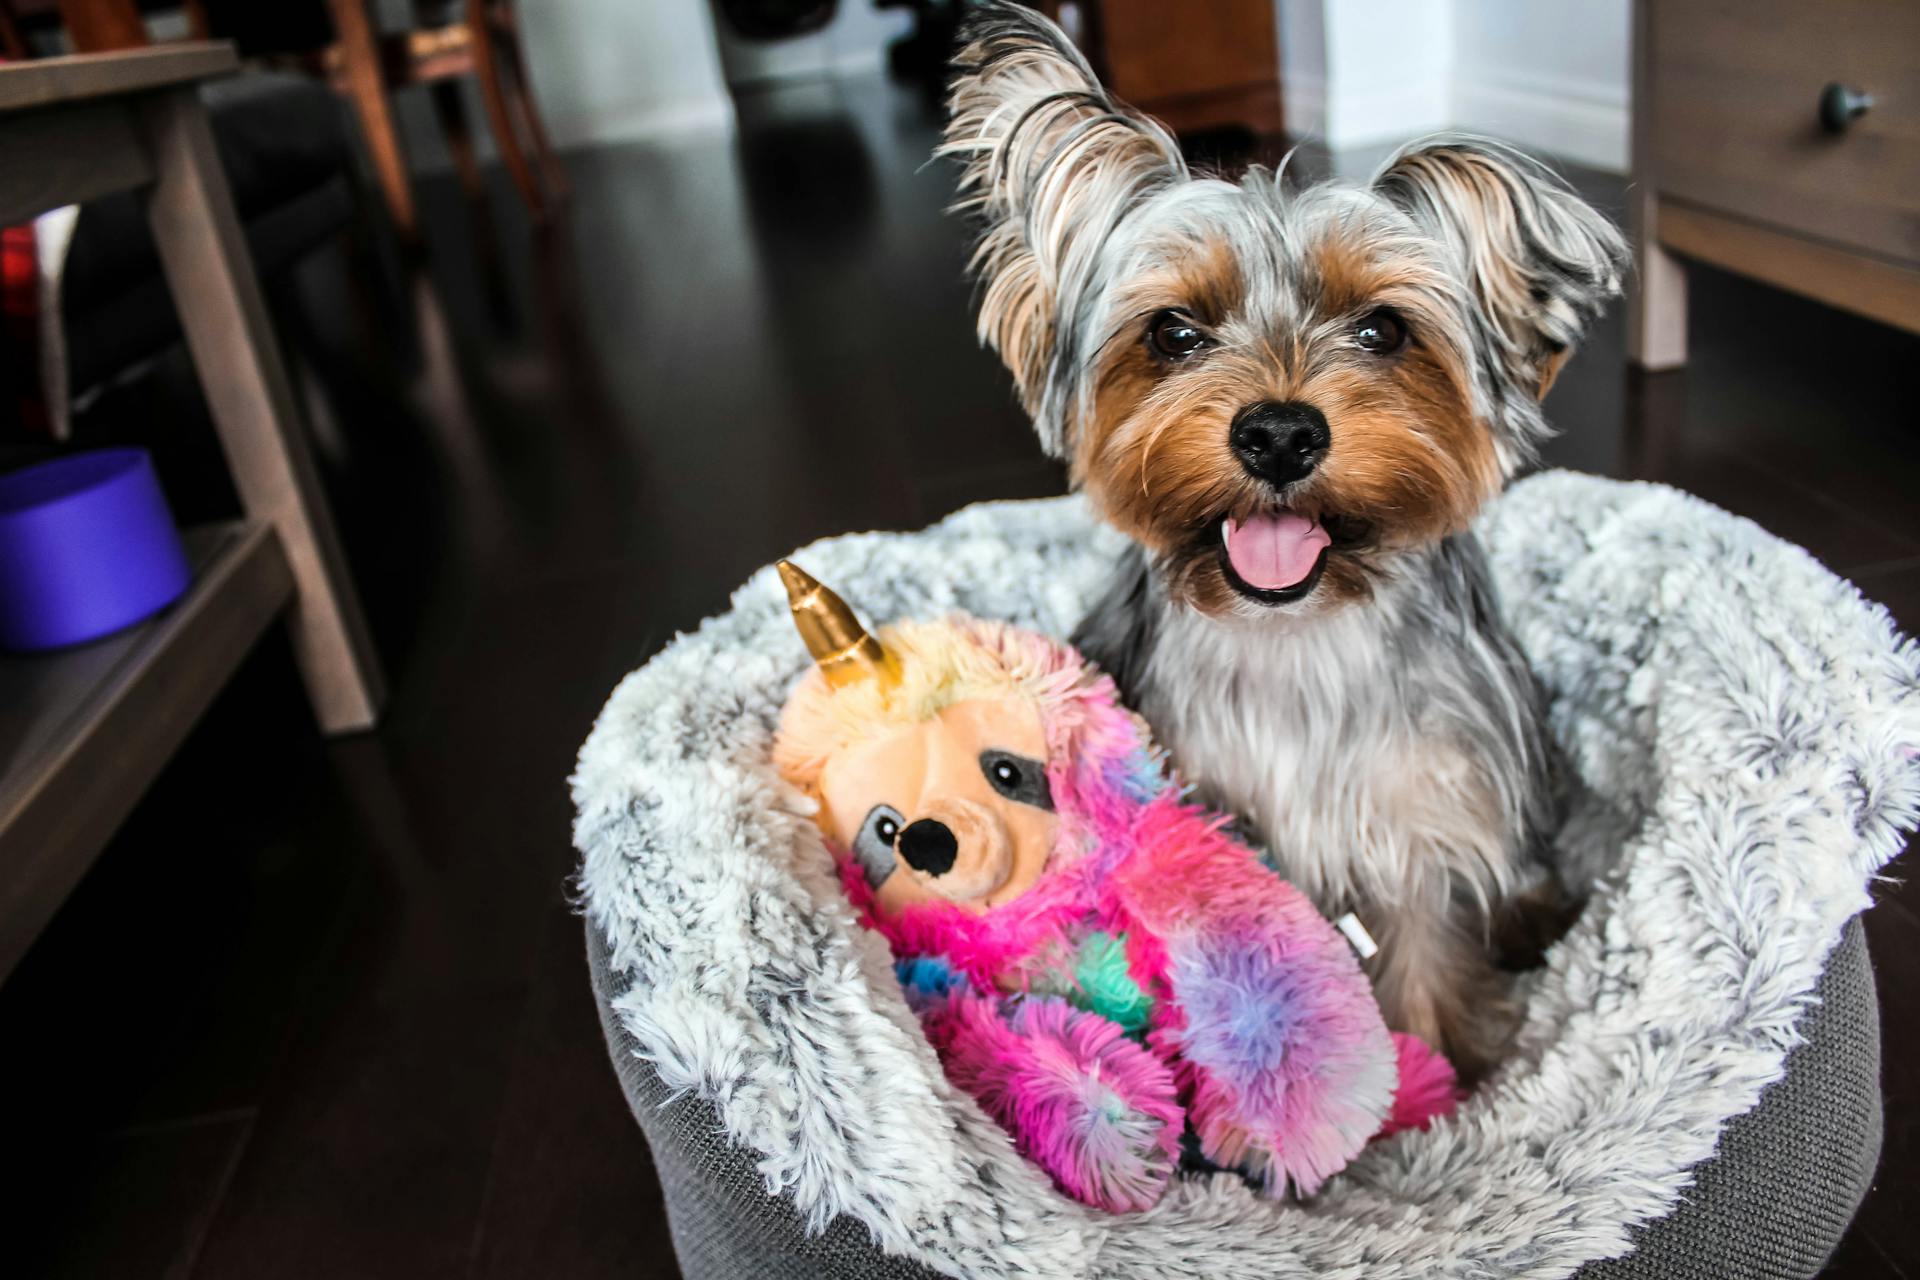 A Yorkshire Terrier sitting inside a dog bed with a toy